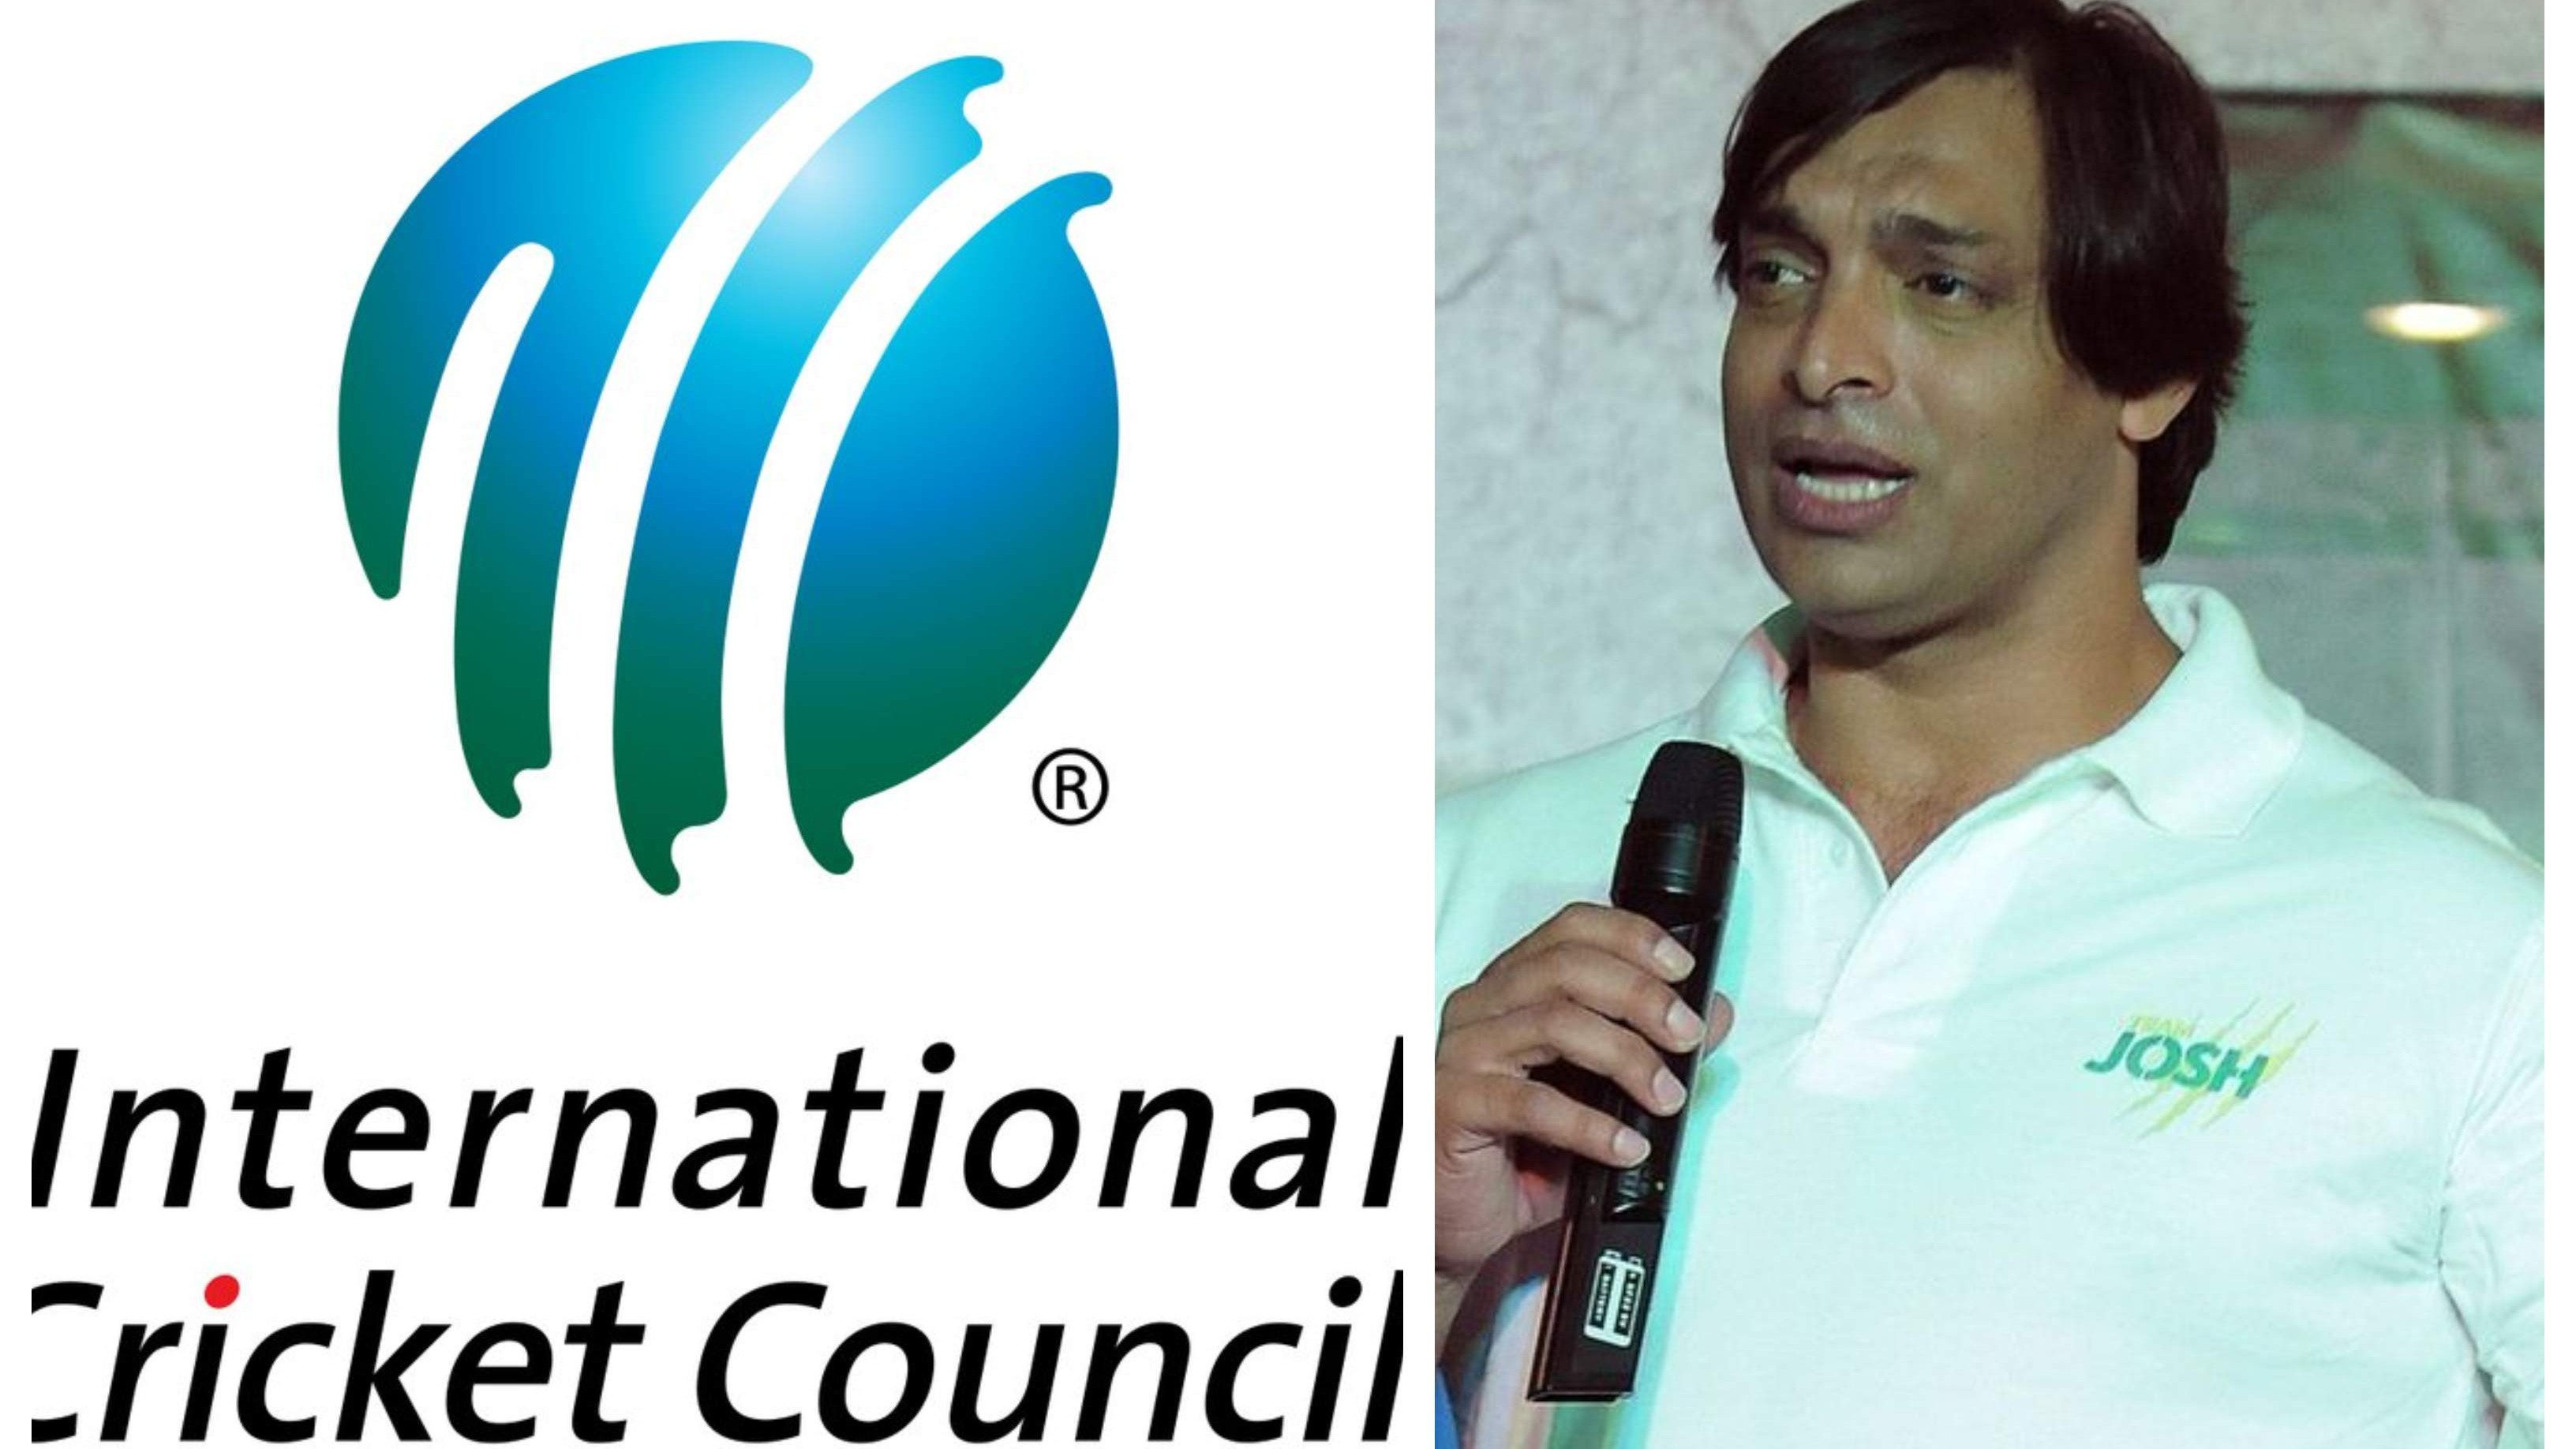 ‘ICC has successfully finished cricket in 10 last years’, claims Shoaib Akhtar